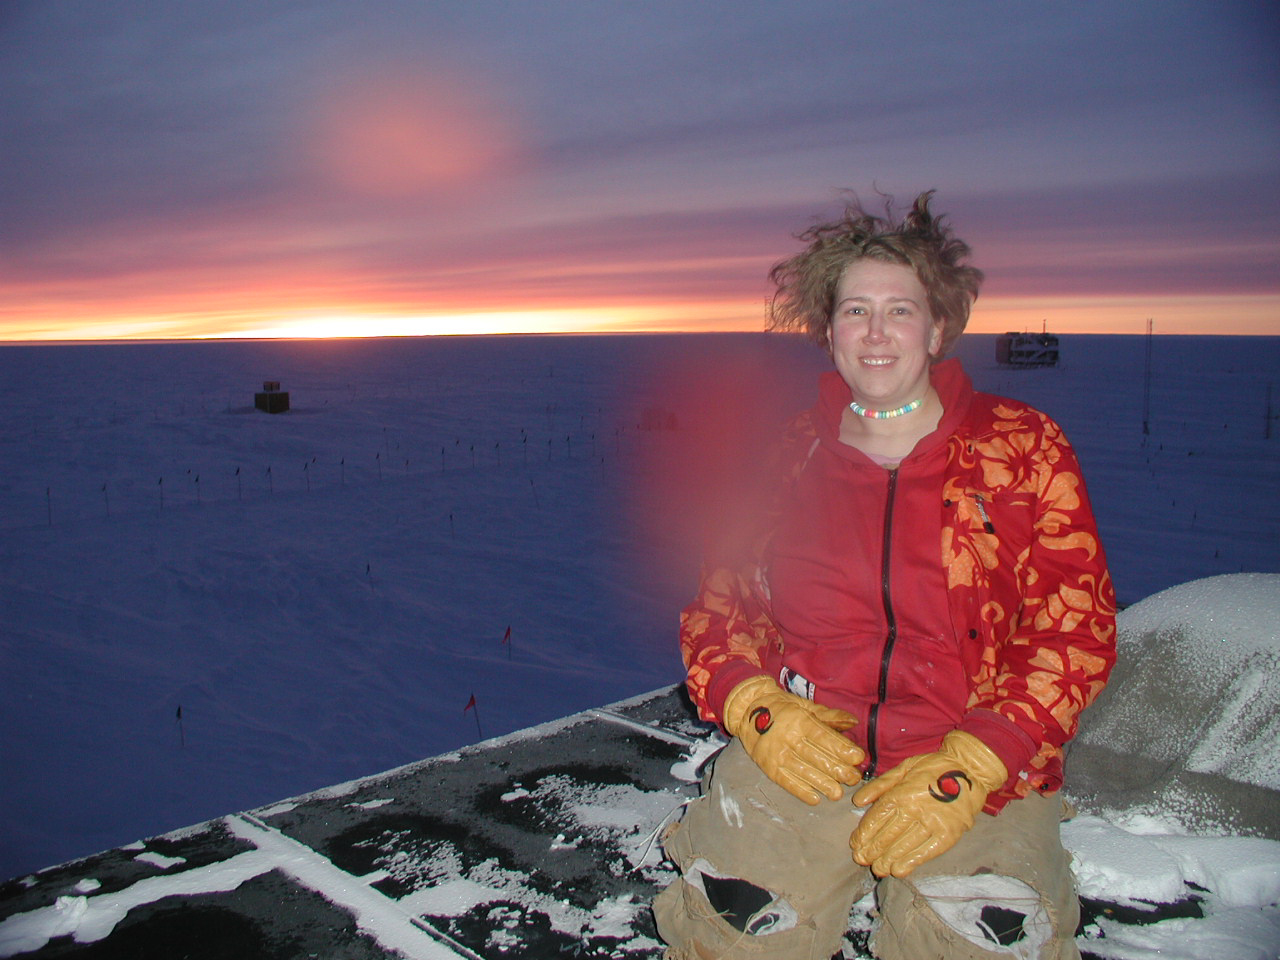 me and an imminent sunrise at south
pole